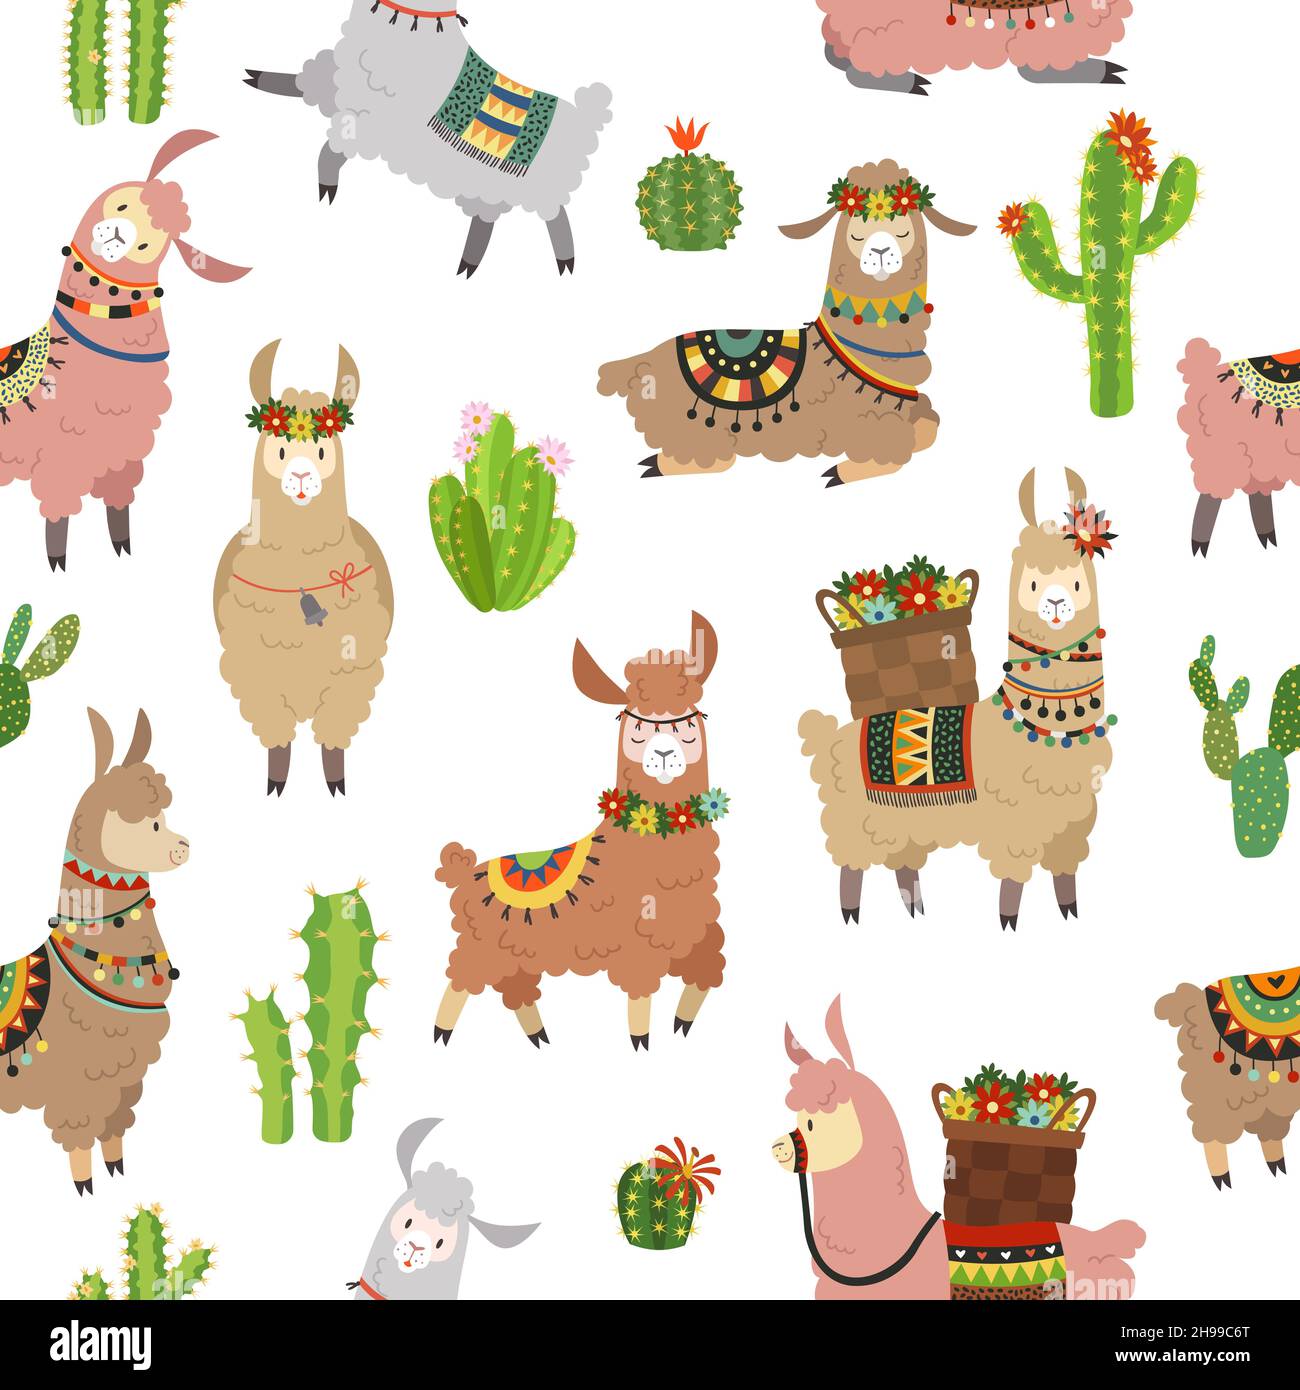 Download wallpaper 938x1668 alpaca funny cool animal wildlife iphone  876s6 for parallax hd background